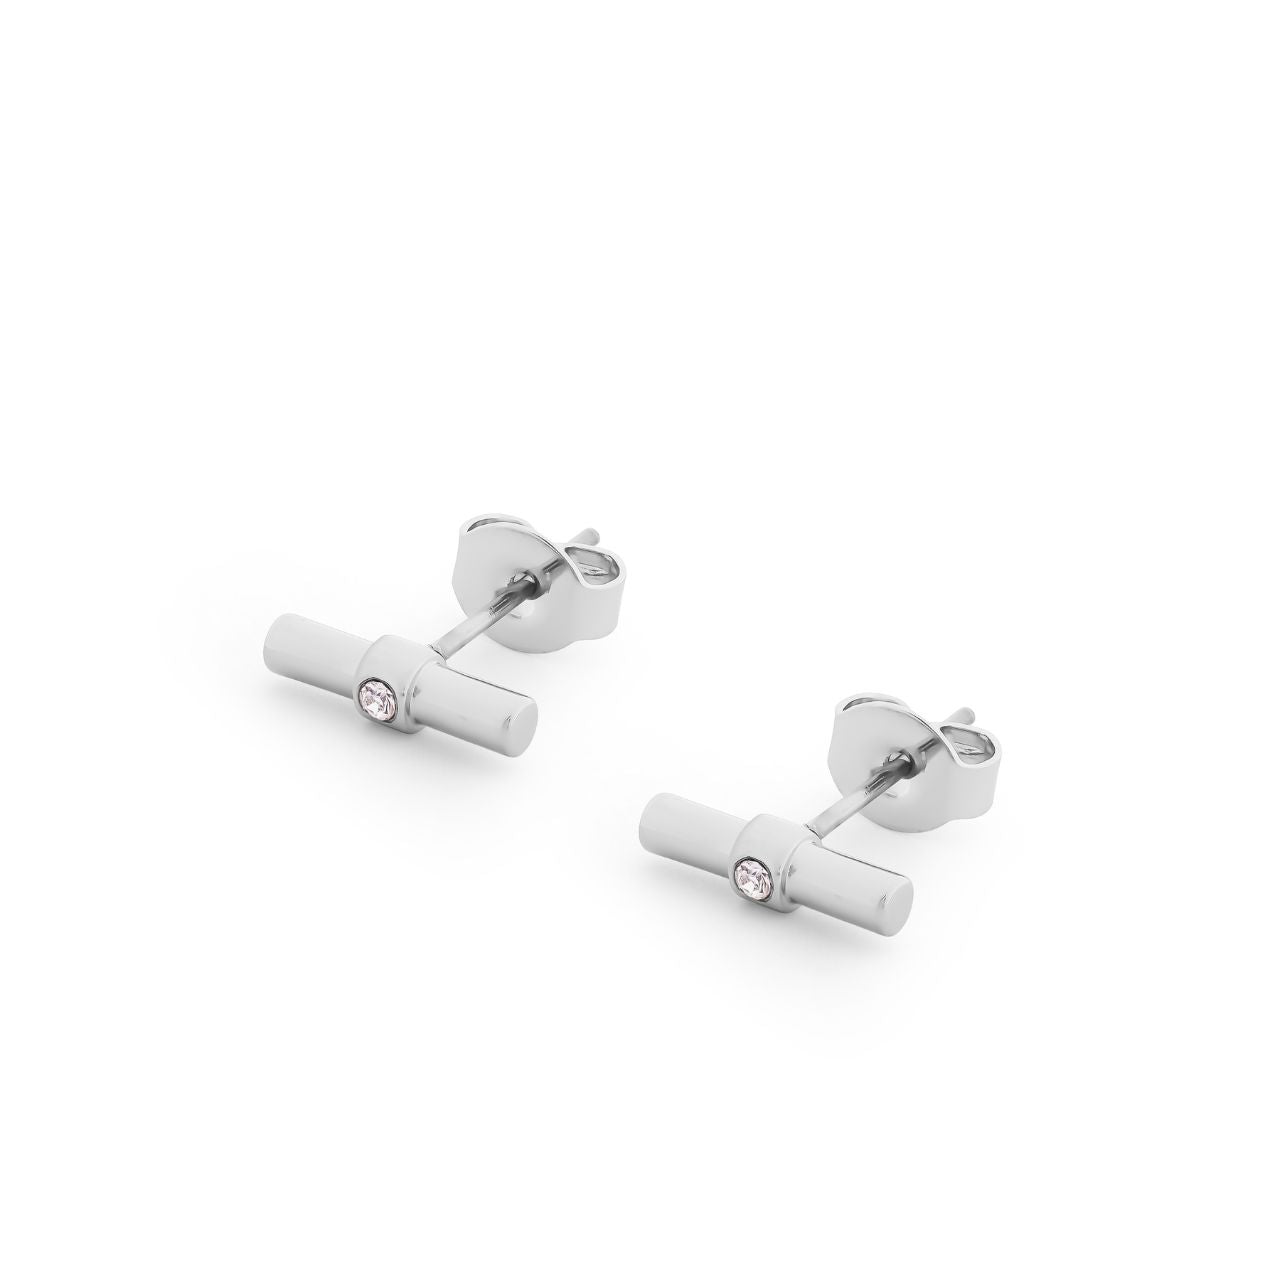 T-Bar Silver Earrings by Tipperary  These Tipperary T-Bar Earrings are the perfect addition to any ensemble. Lightweight and flexible, providing a comfortable fit for any wearer. The T-bar design offers an understated yet luxurious look, certain to elevate any look.